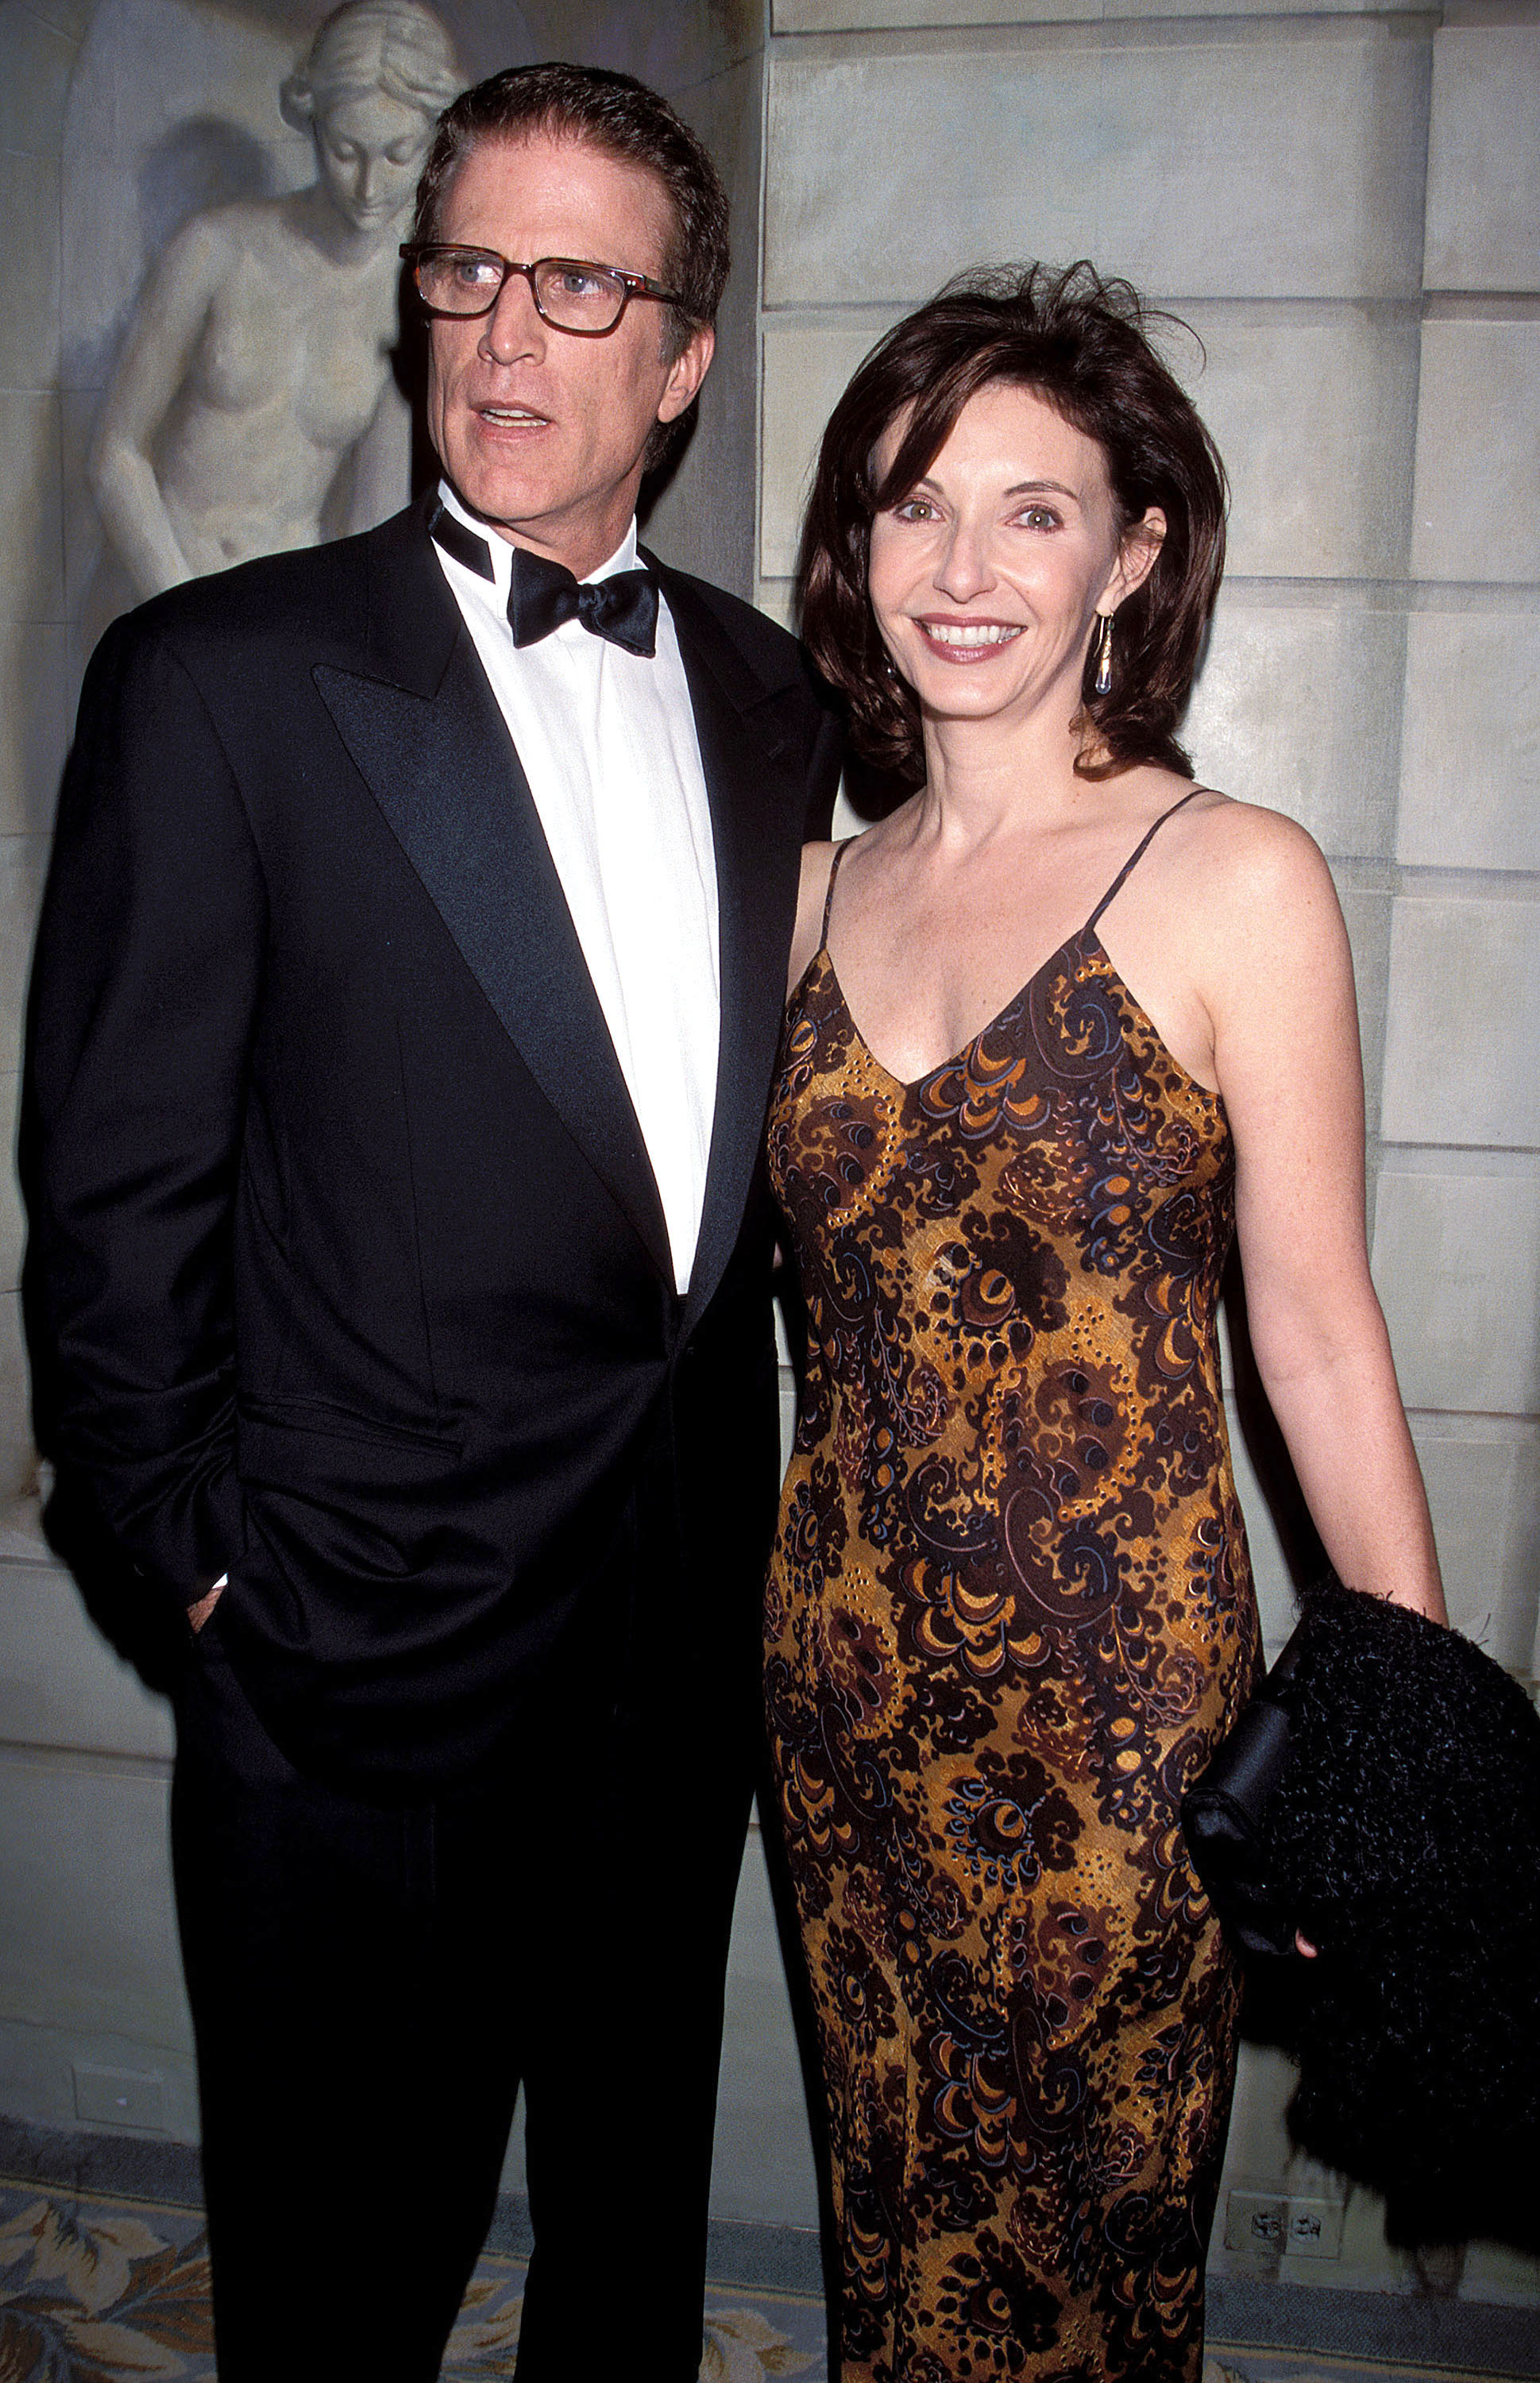 Ted Danson and Mary Steenburgen at the Creative Coalition Spotlight Awards Gala in New York City, New York, on November 30, 1998. | Source: Getty Images